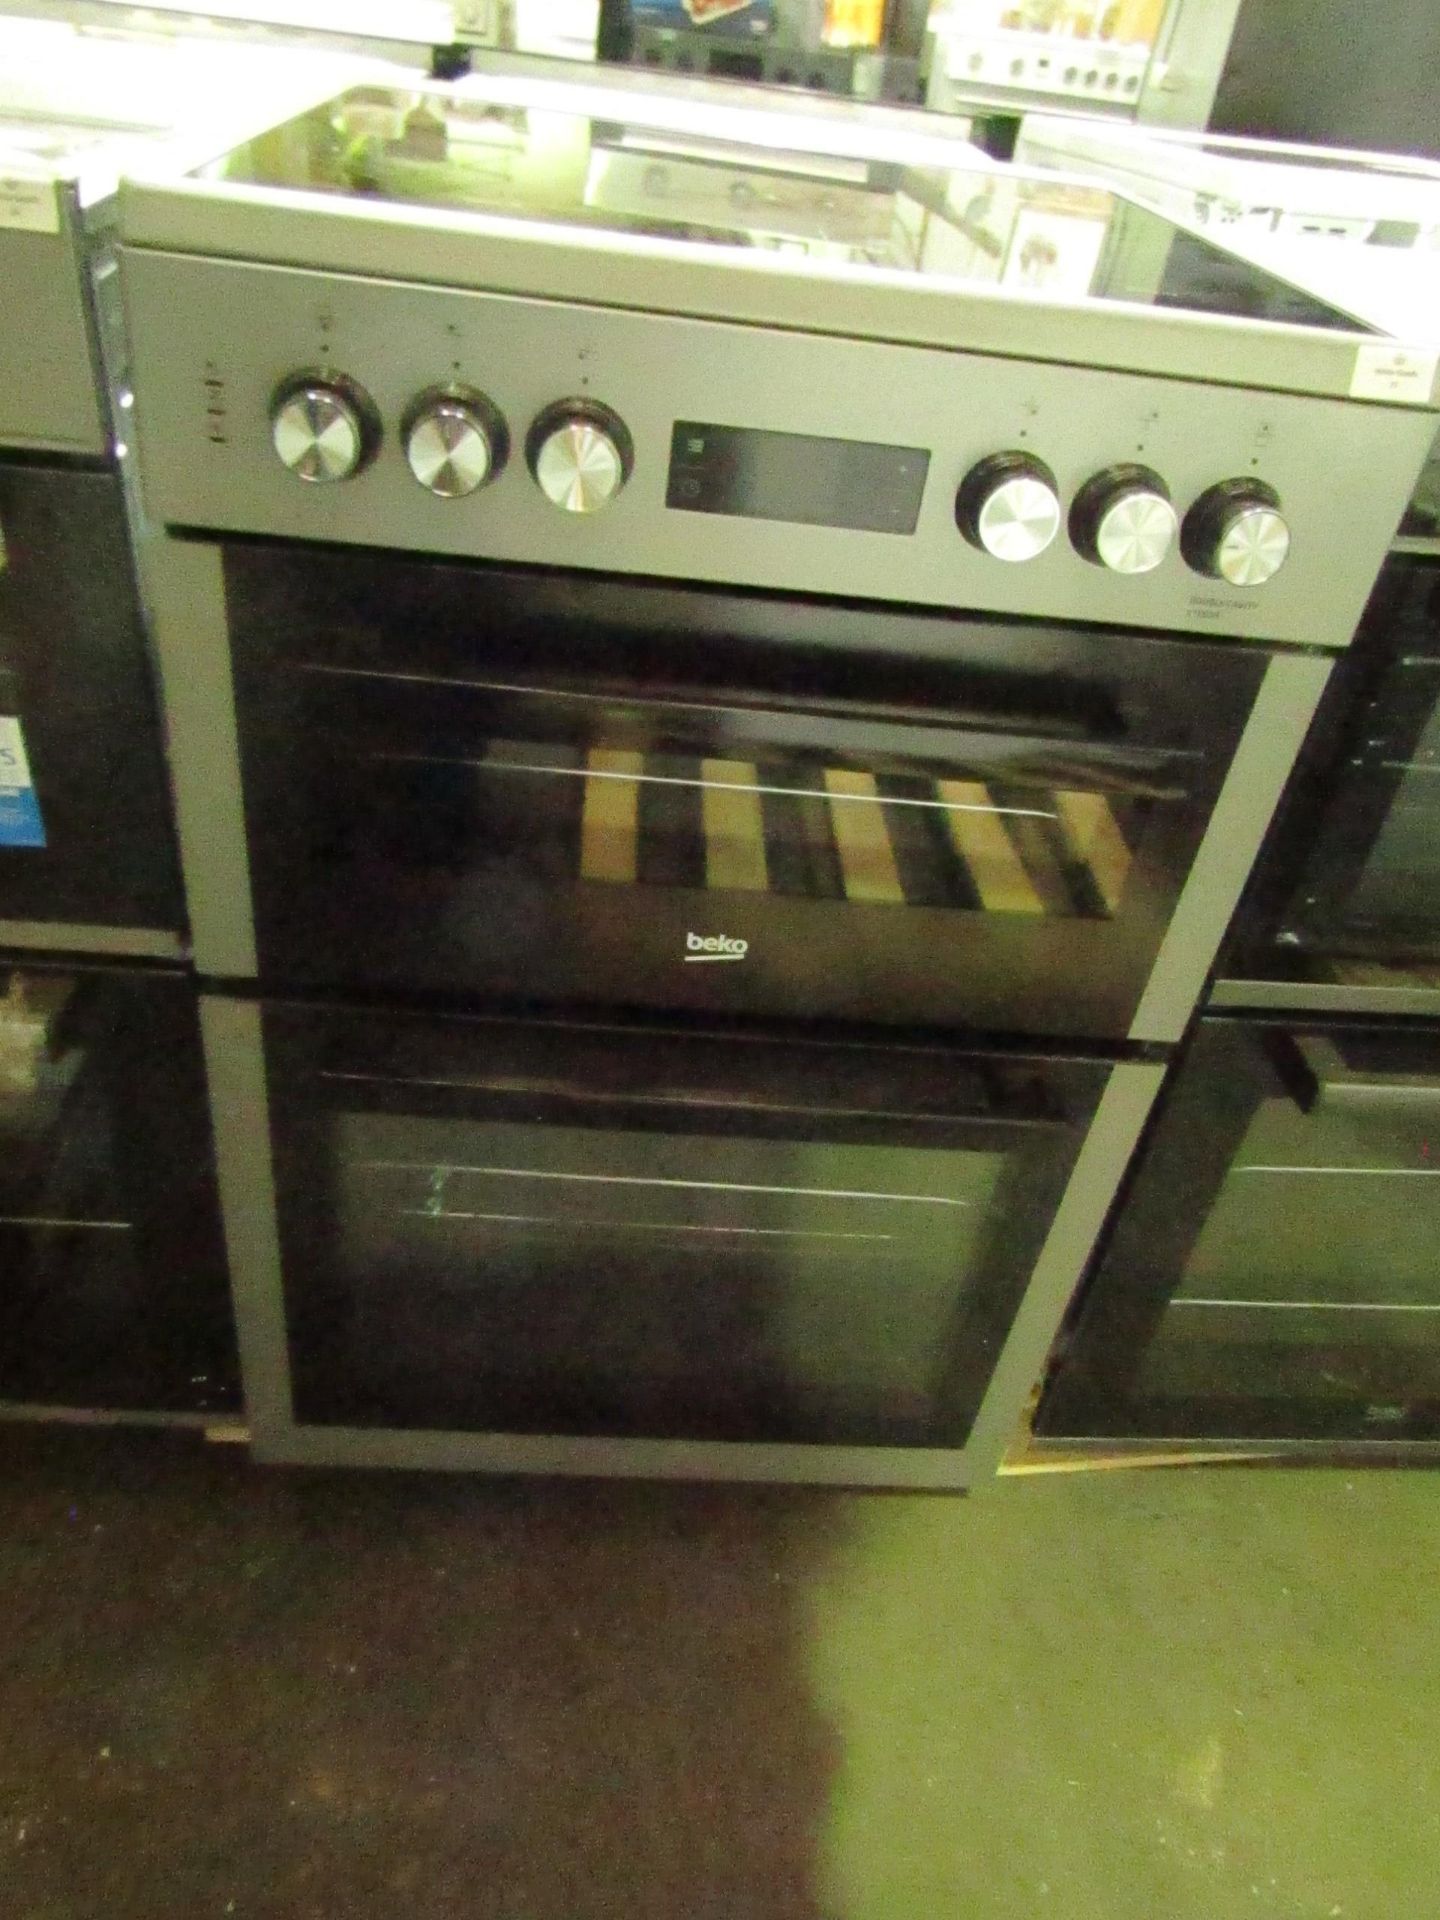 BEKO 60 cm Electric Ceramic Cooker Black & Silver XDC653K RRP “?389.00 - This item looks to be in